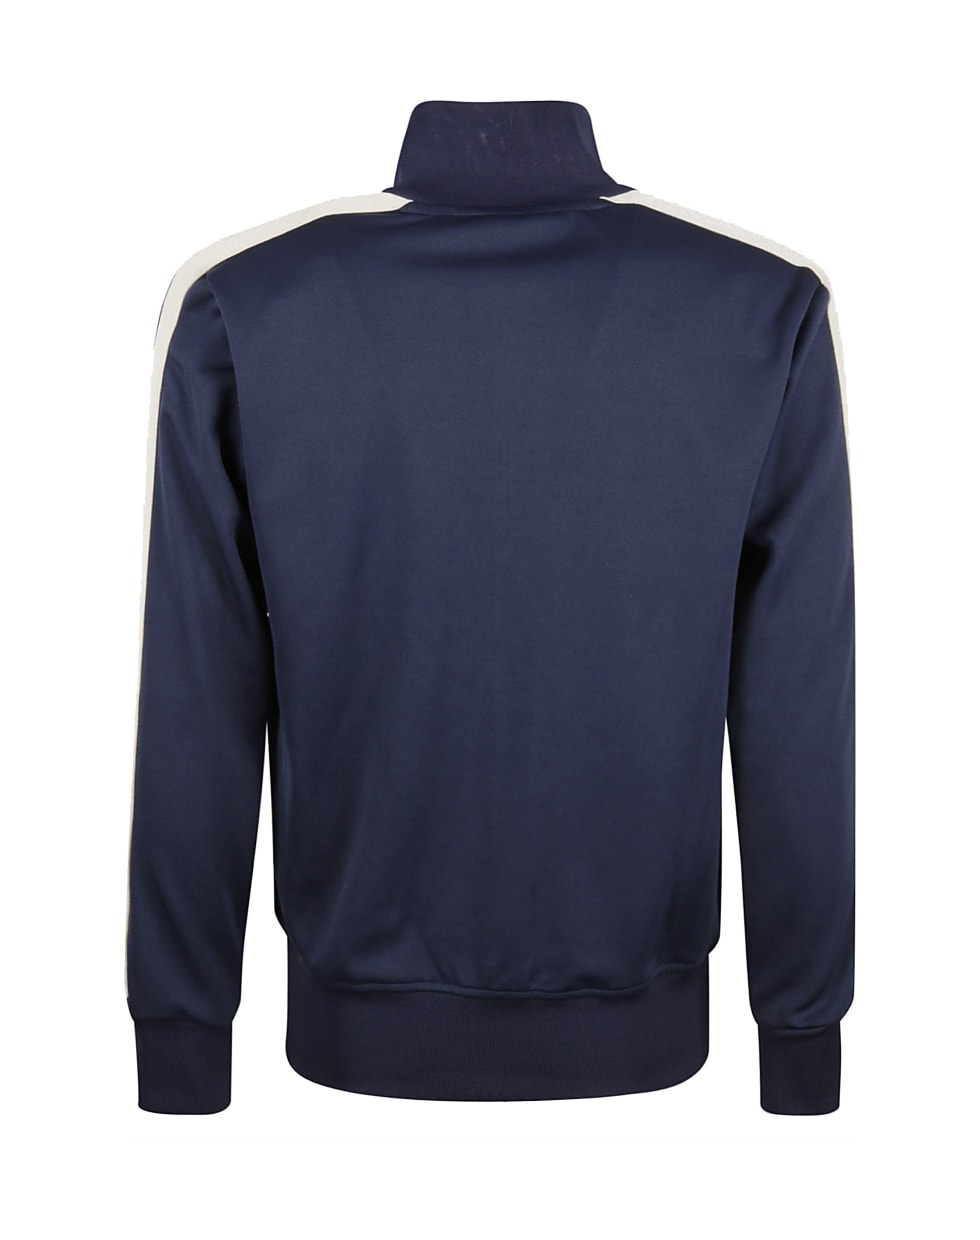 Palm Angels Classic Track Jacket - Navy Blue/White